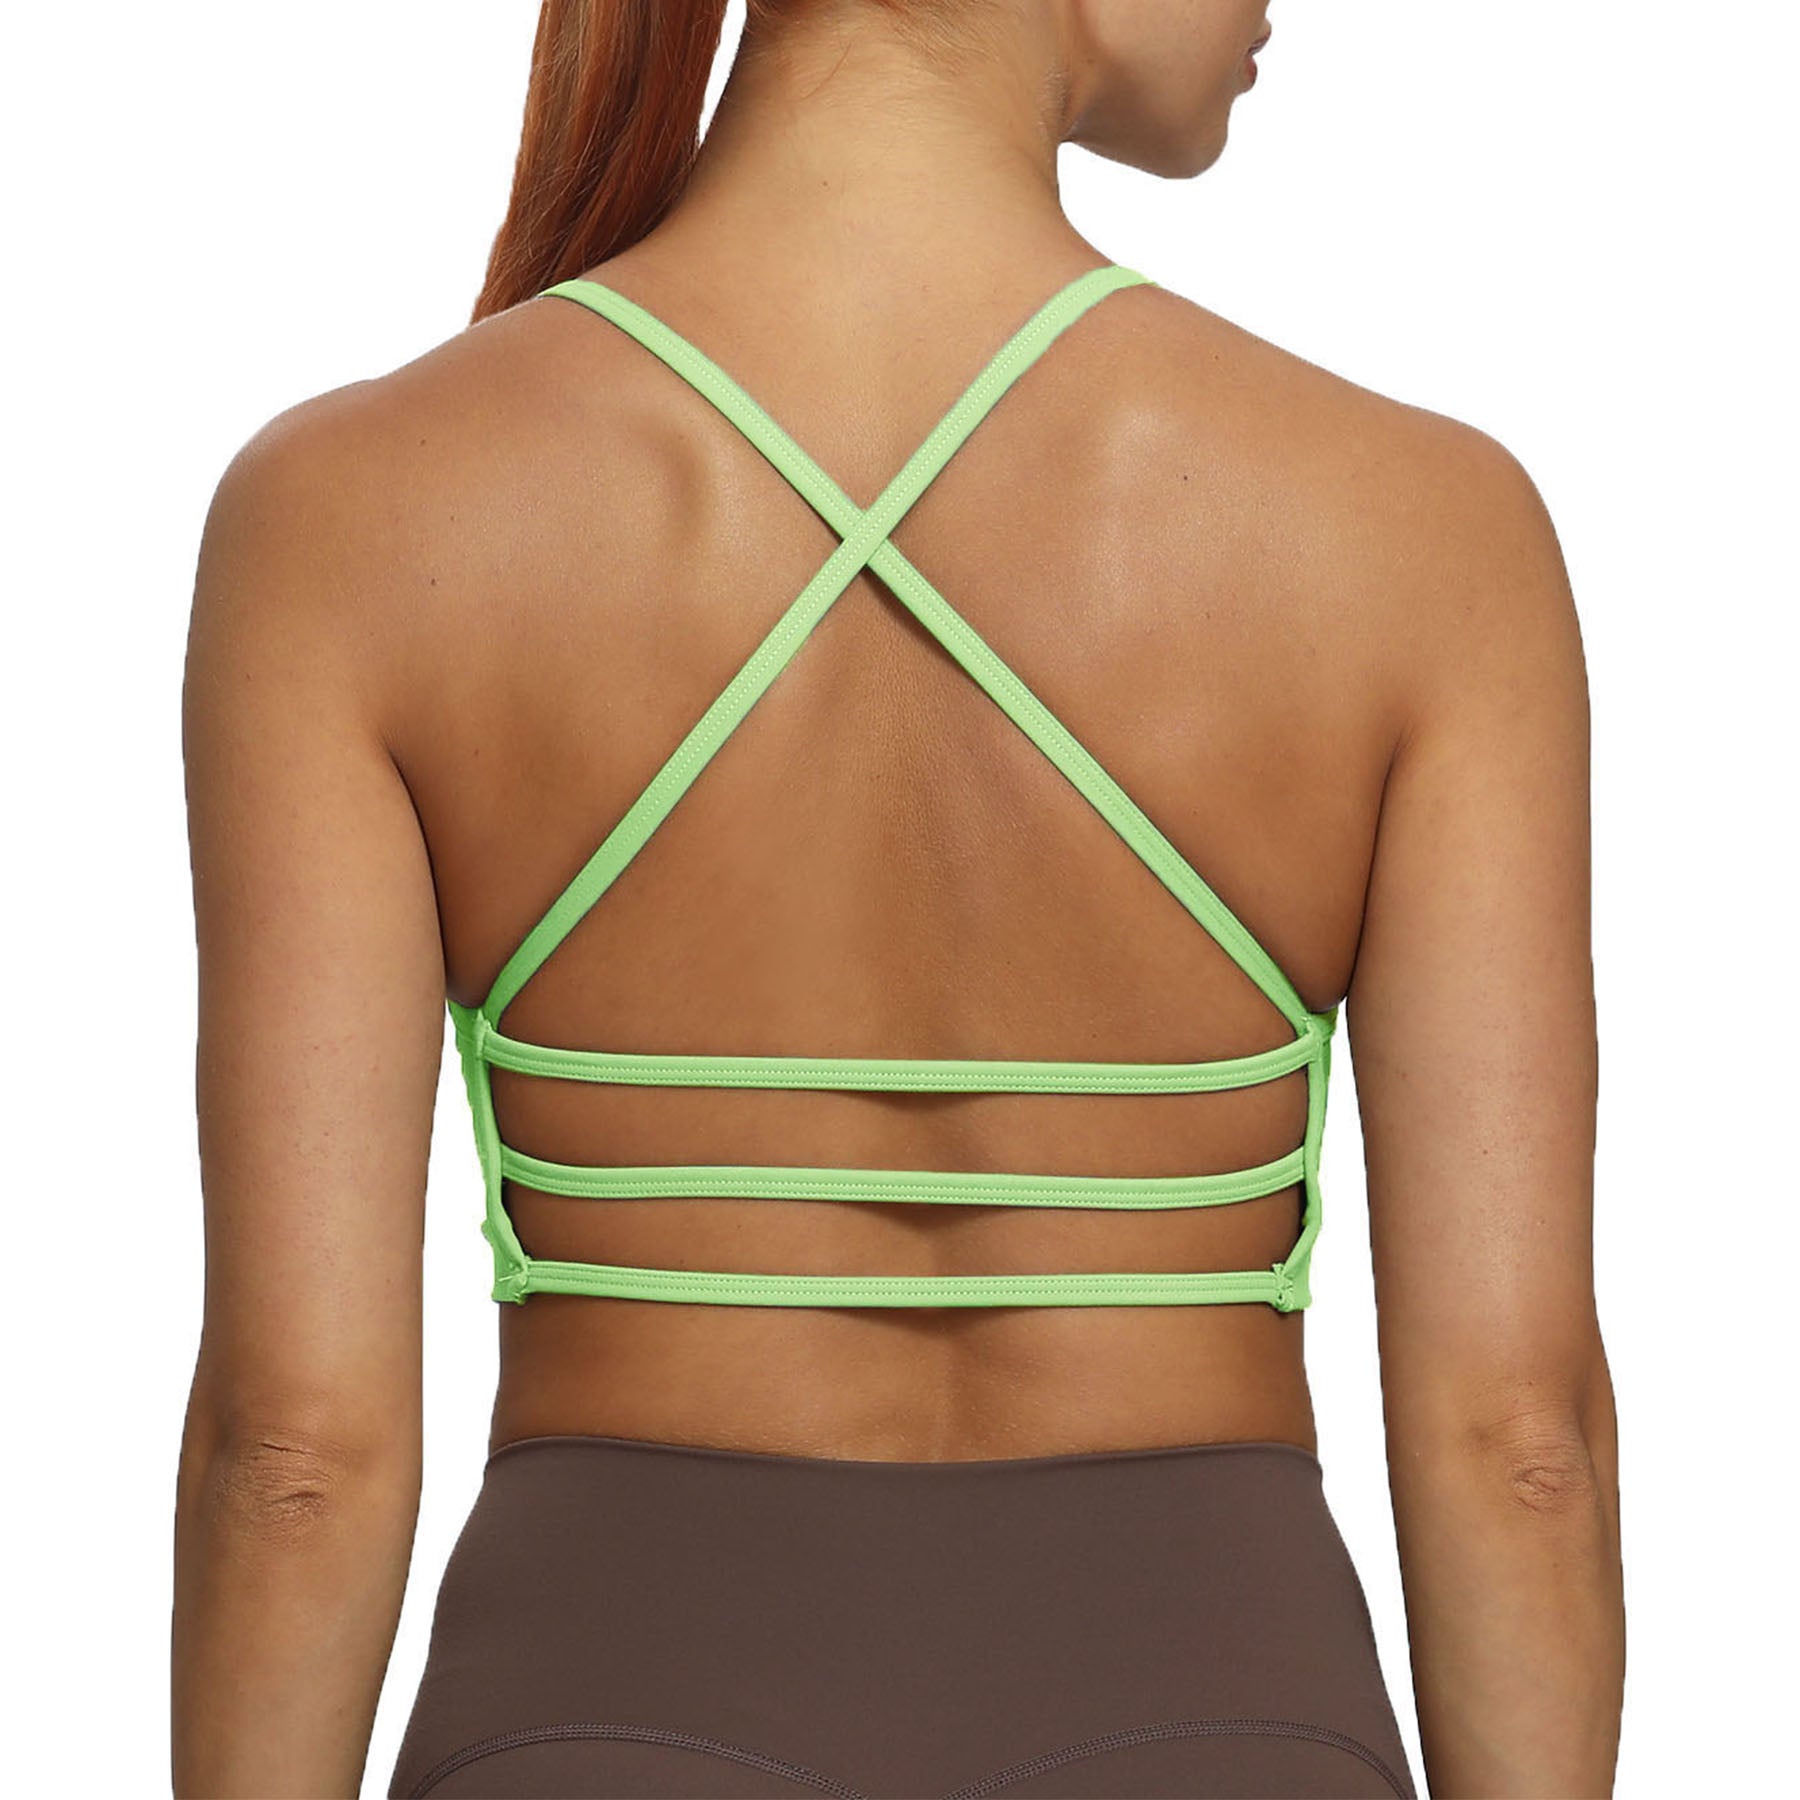 NO EXCUSE FITNESS APPAREL Green Perforated Criss-Cross Back Sports Bra